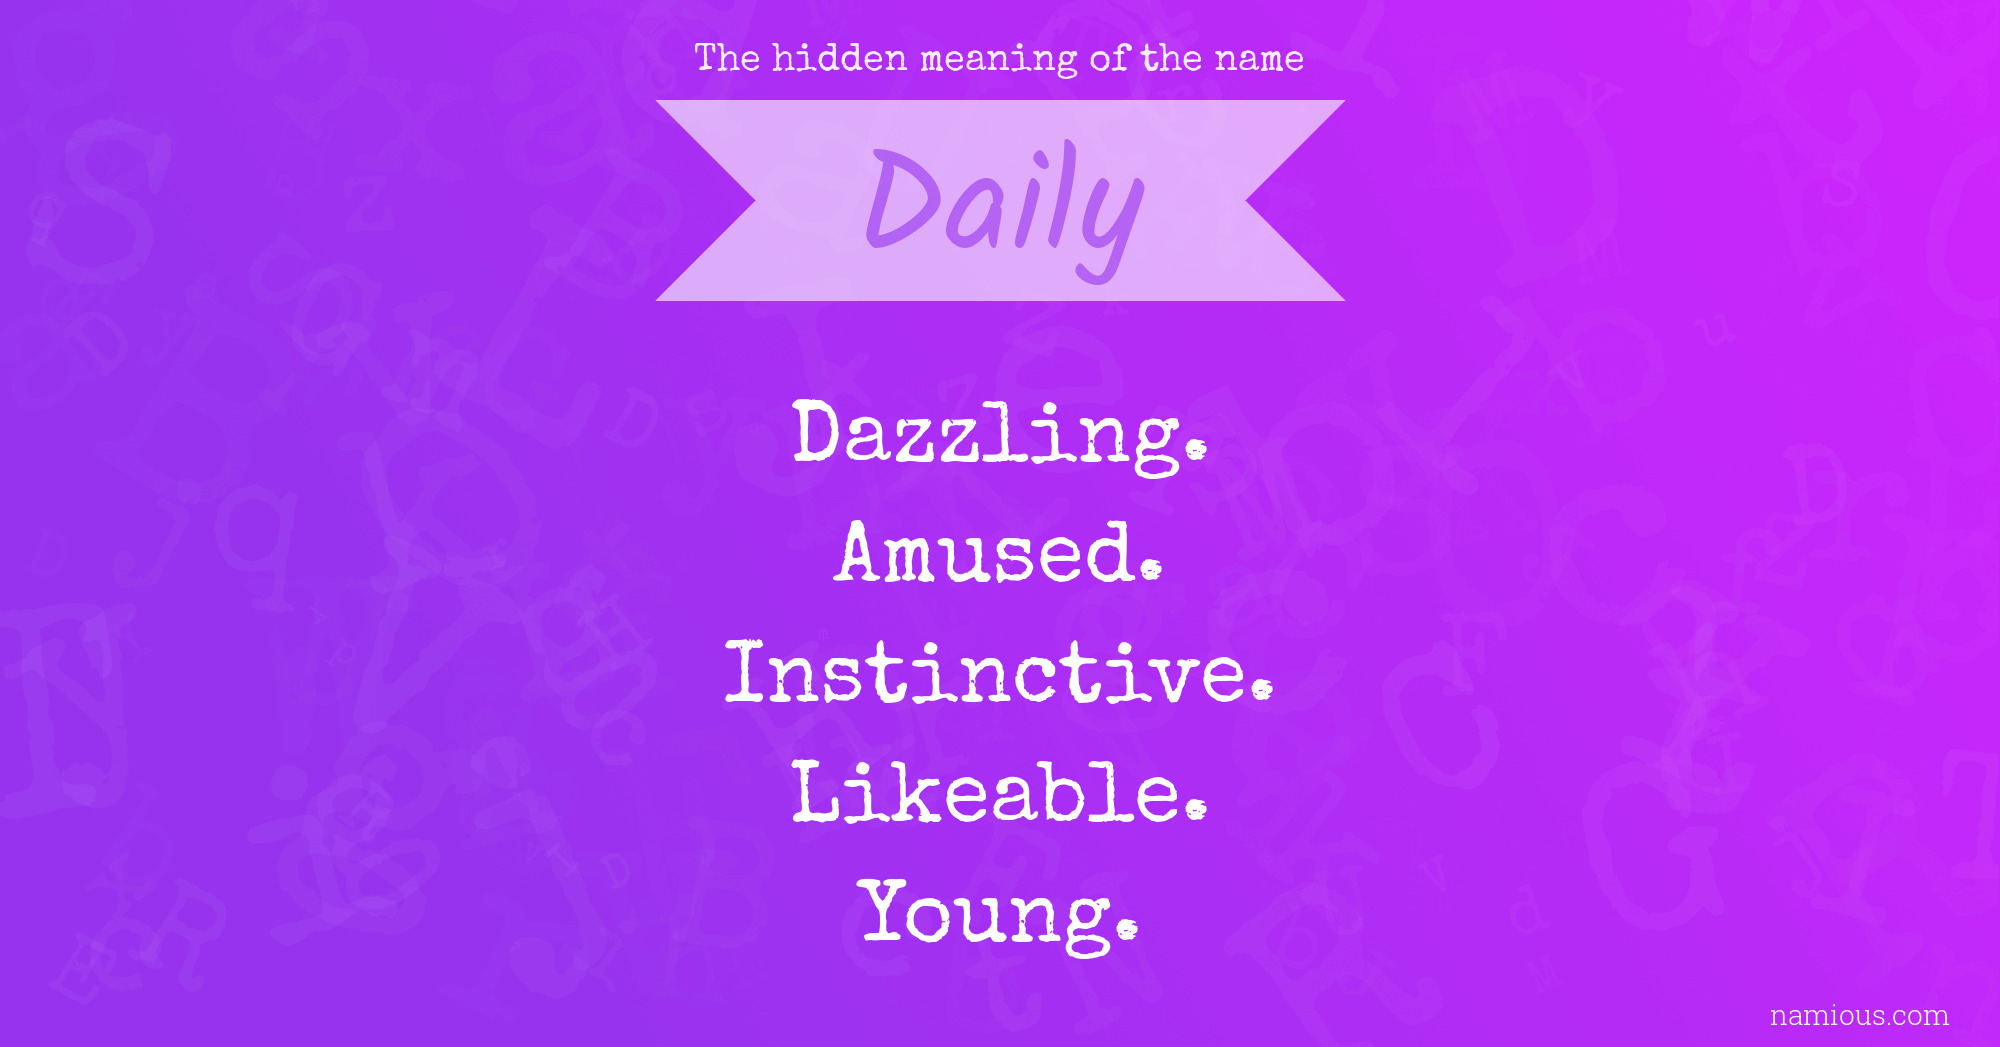 The hidden meaning of the name Daily